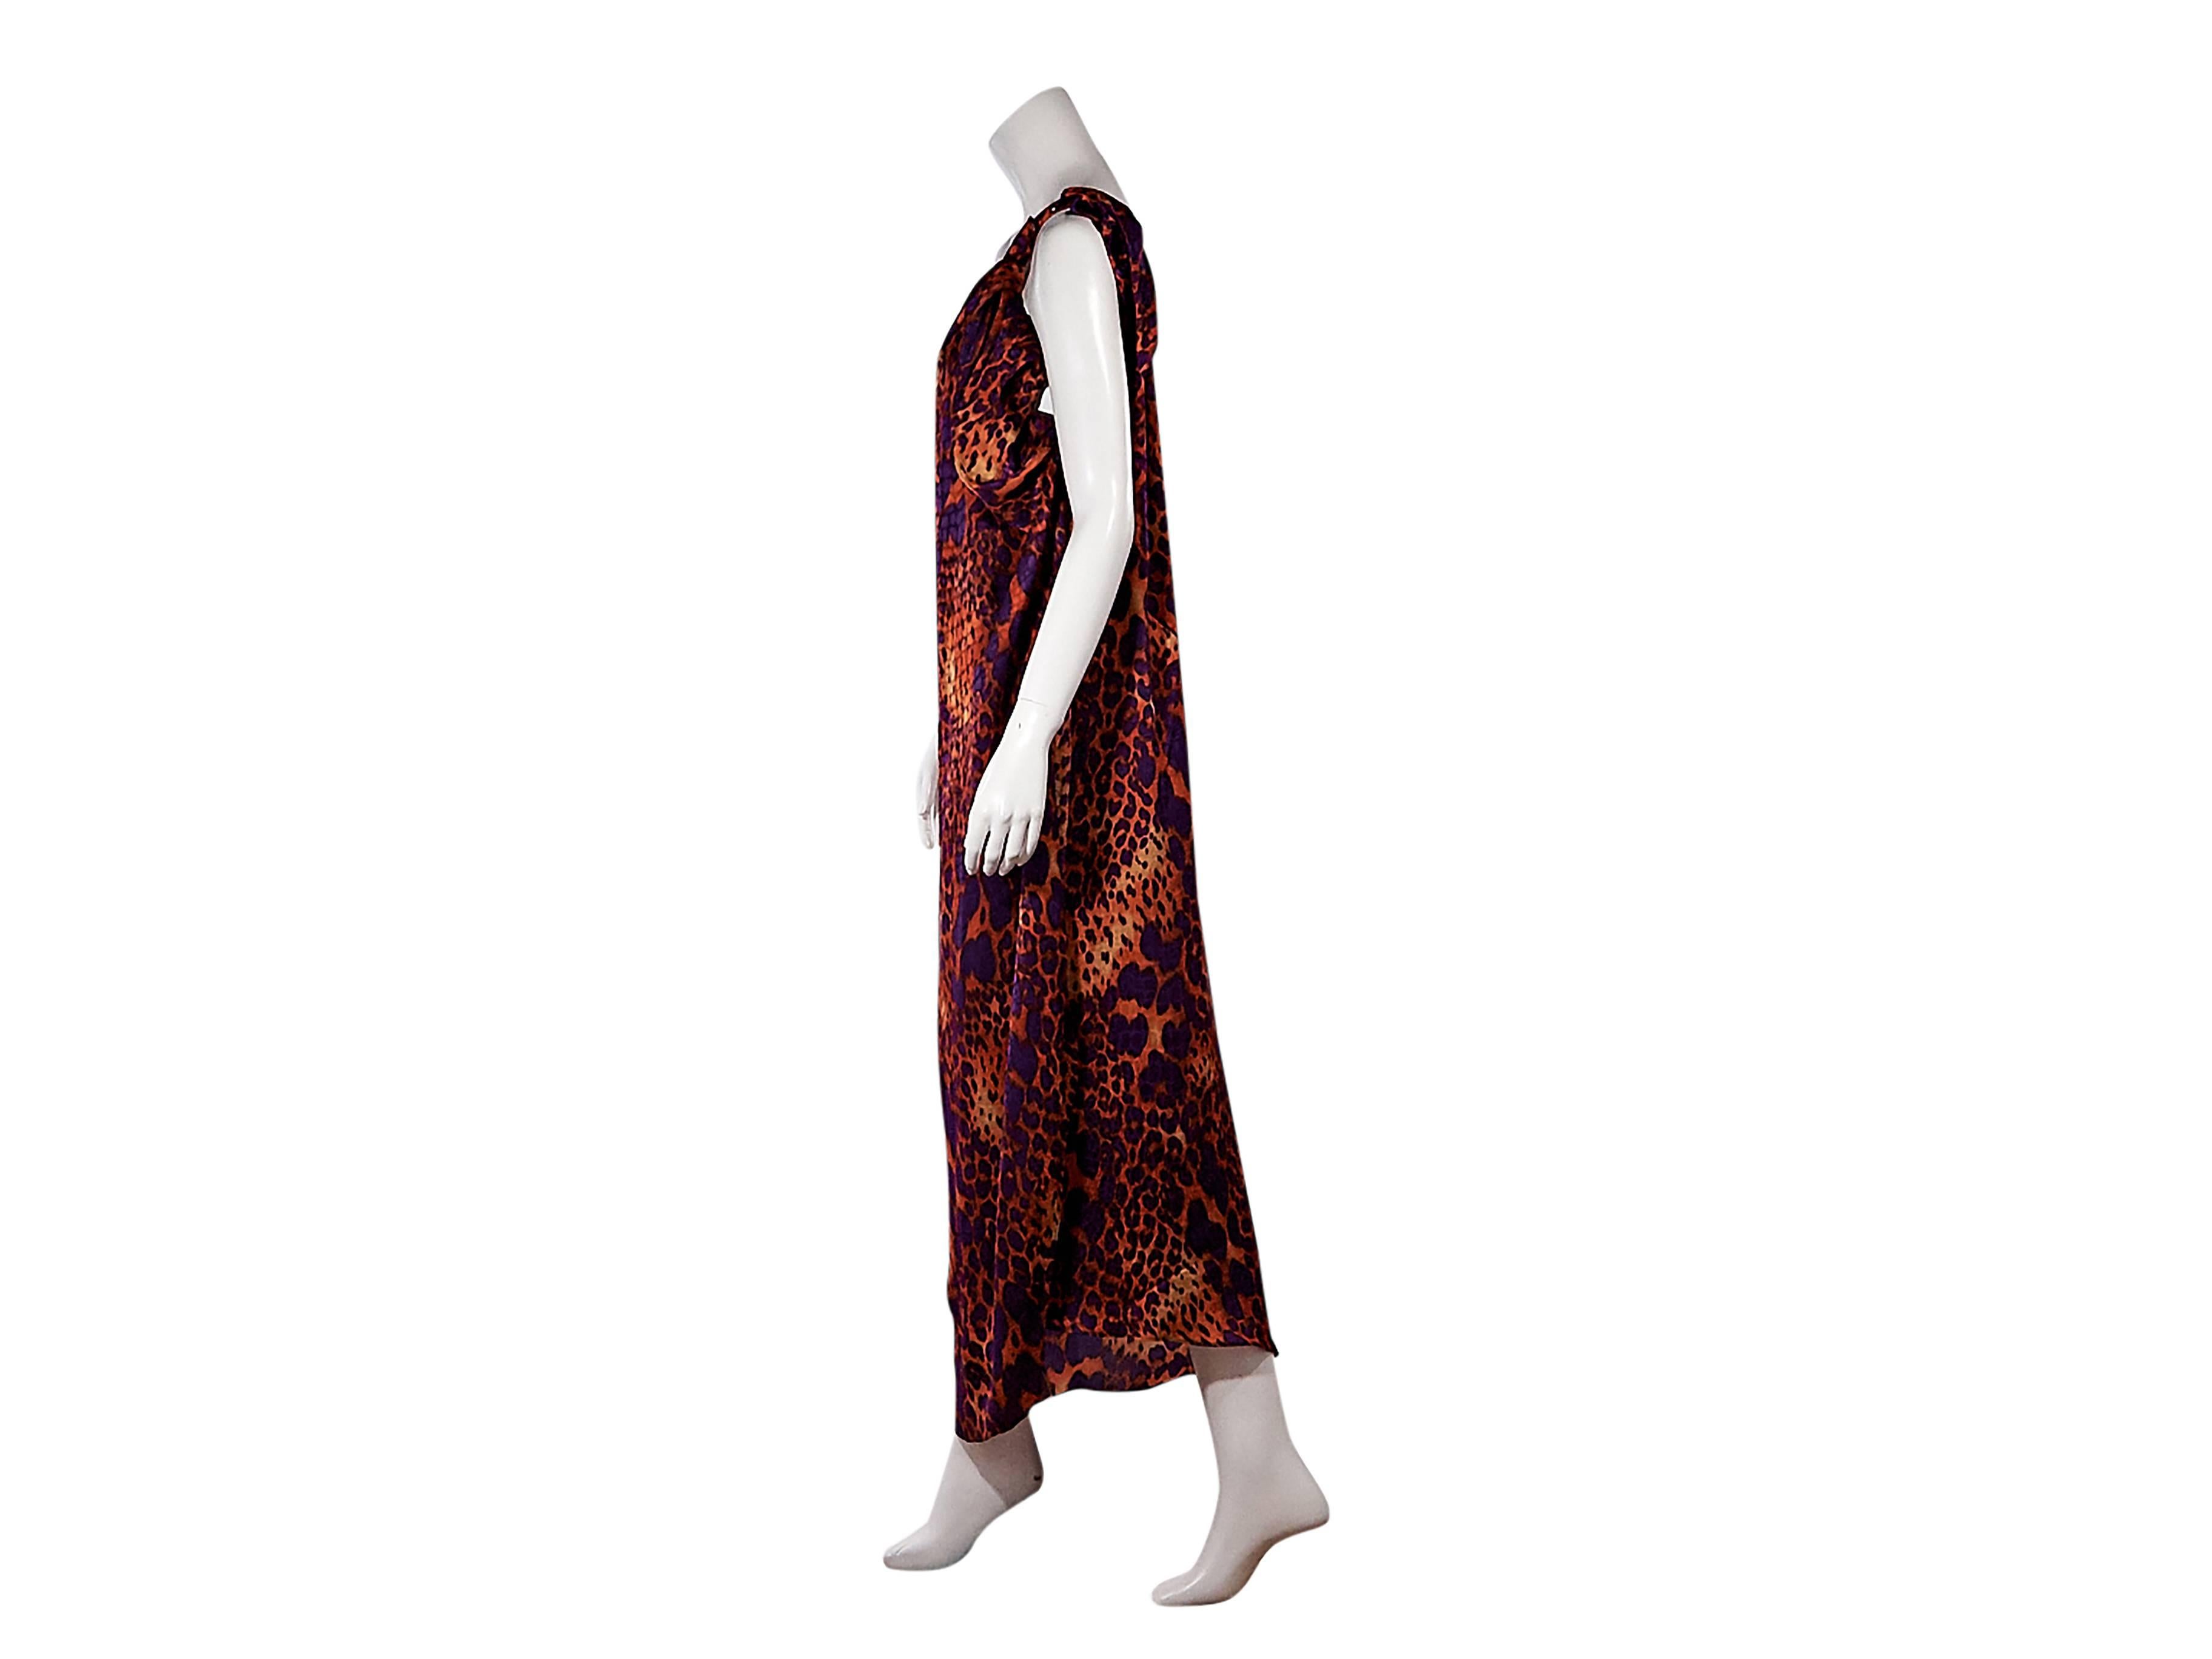 Product details:  Orange and purple printed one-shoulder silk dress by Salvatore Ferragamo.  Adjustable button closure at shoulder.  Label size IT 44. US size 8
Condition: Pre-owned. Very good. 

Est. Retail $ 795.00